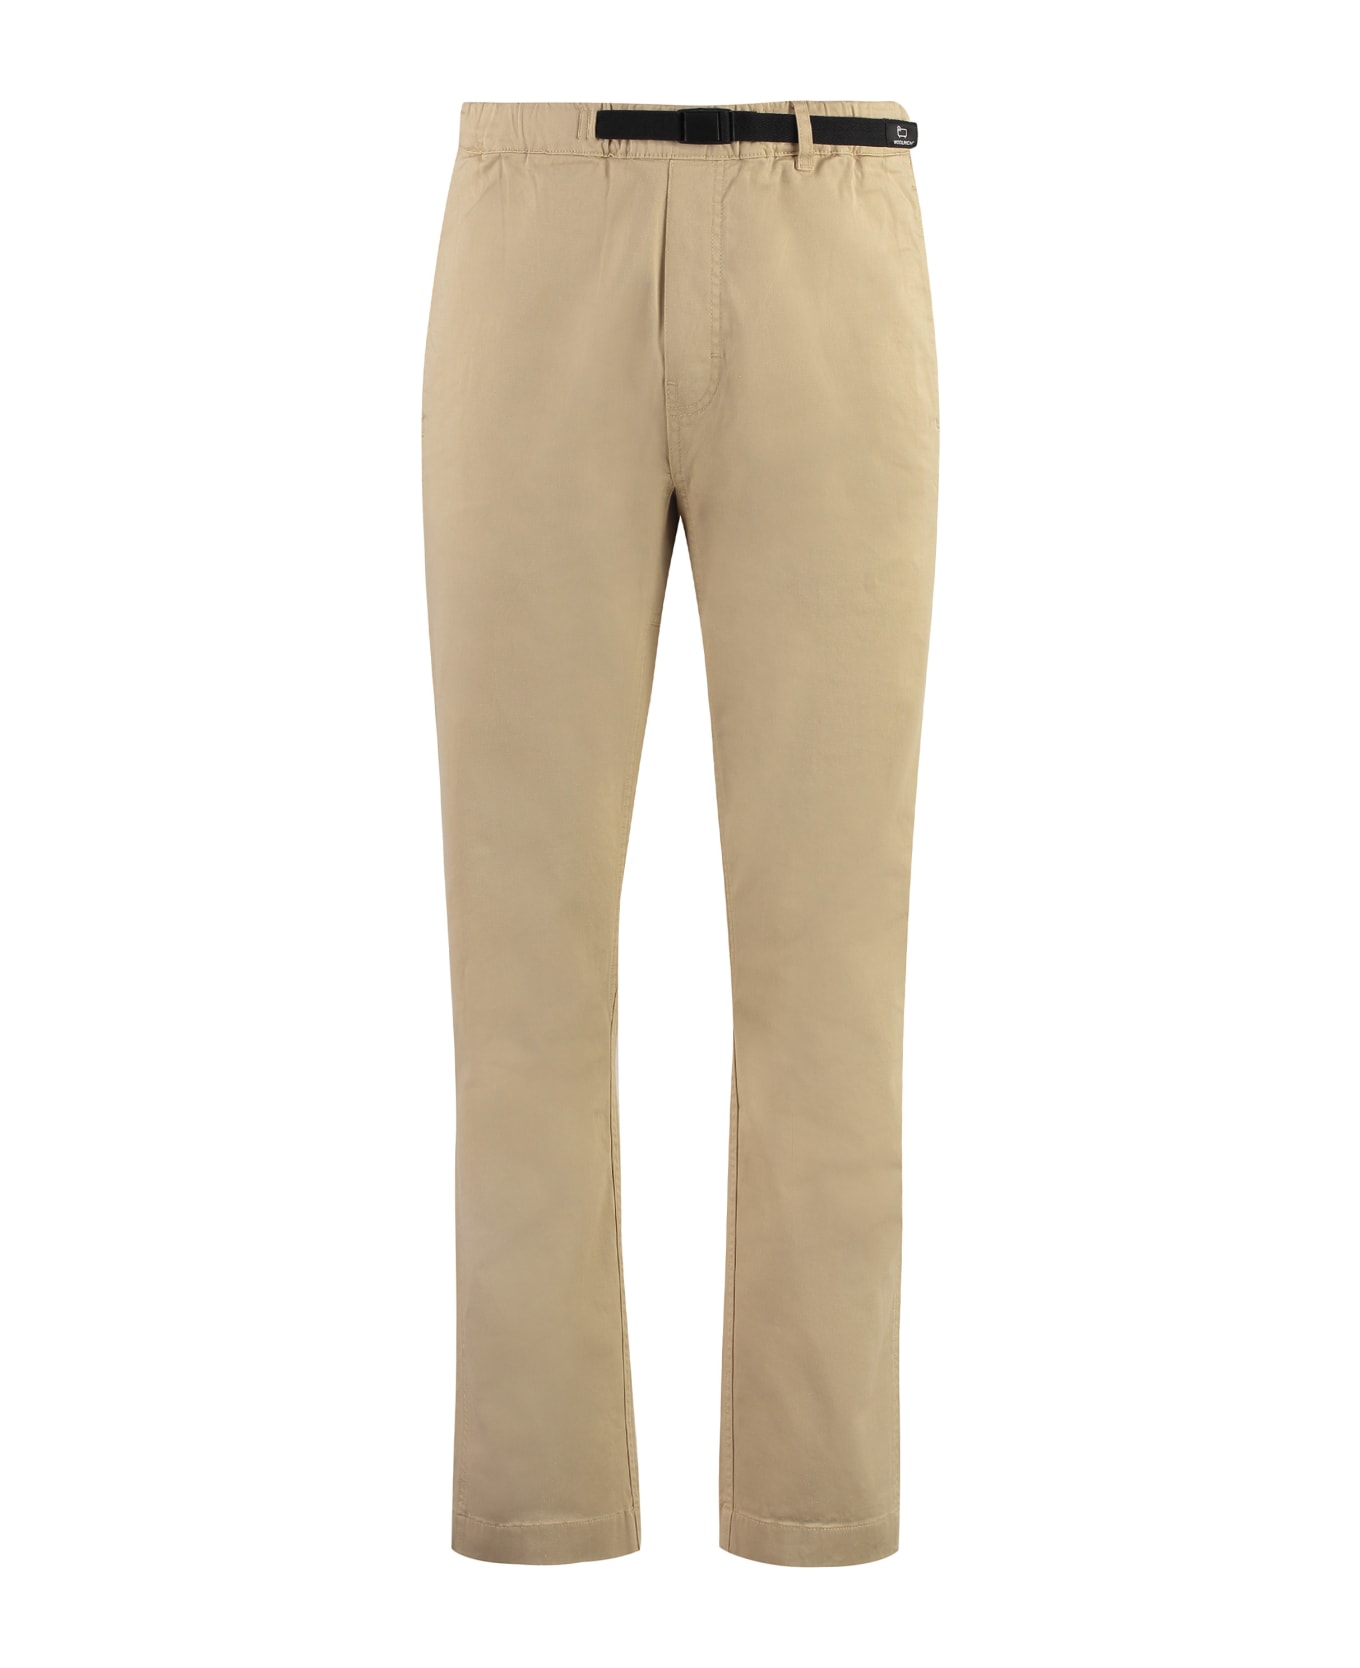 Woolrich Easy Cotton Trousers - Sand ボトムス